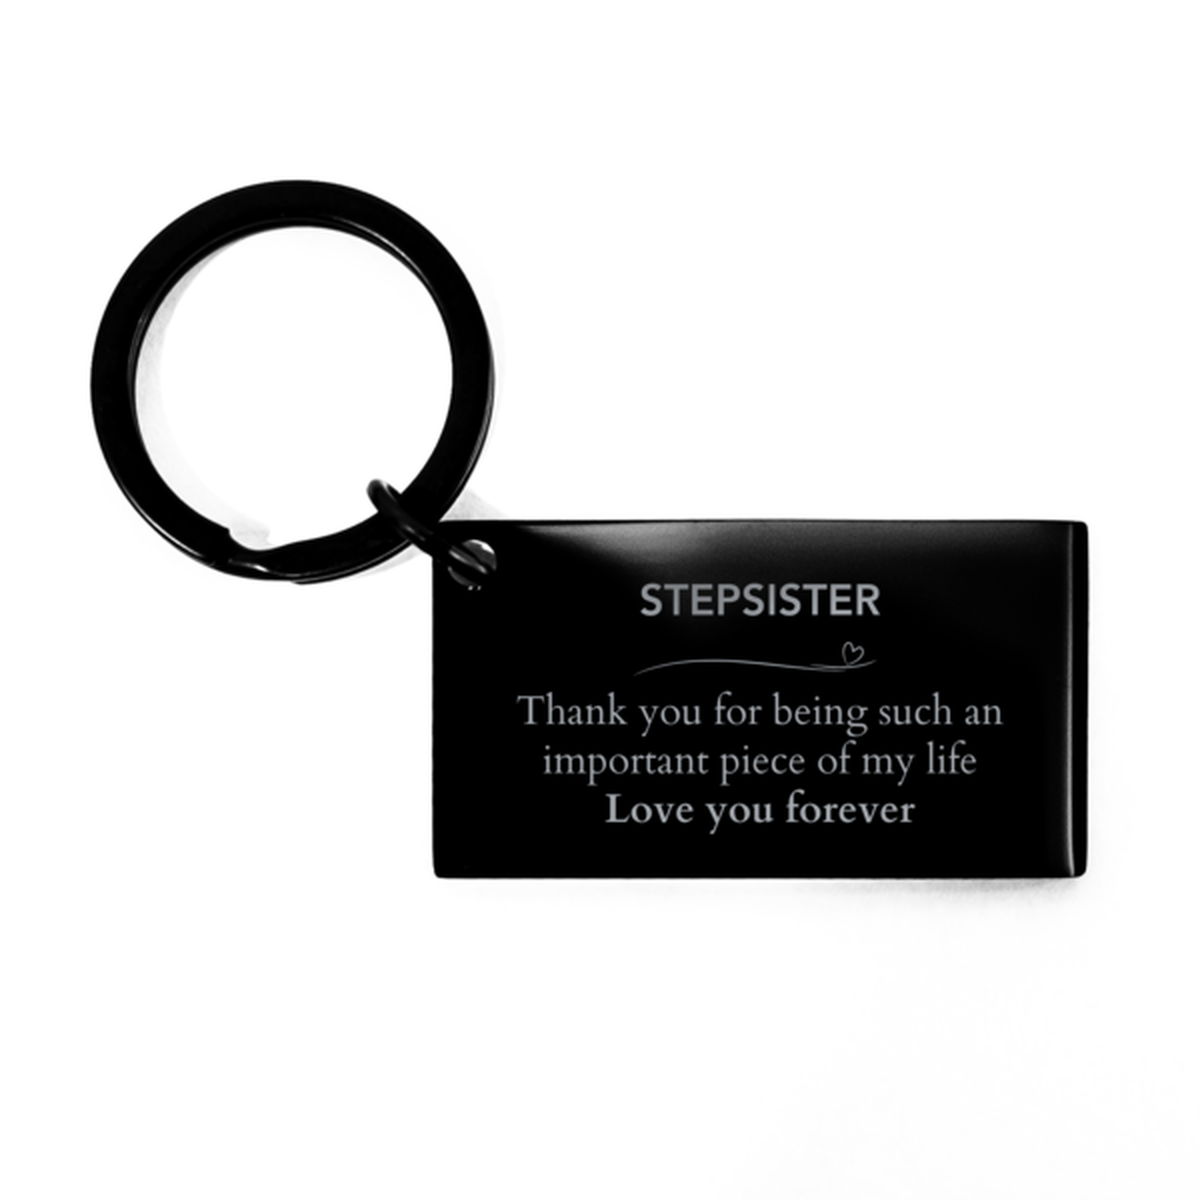 Appropriate Stepsister Keychain Epic Birthday Gifts for Stepsister Thank you for being such an important piece of my life Stepsister Christmas Mothers Fathers Day